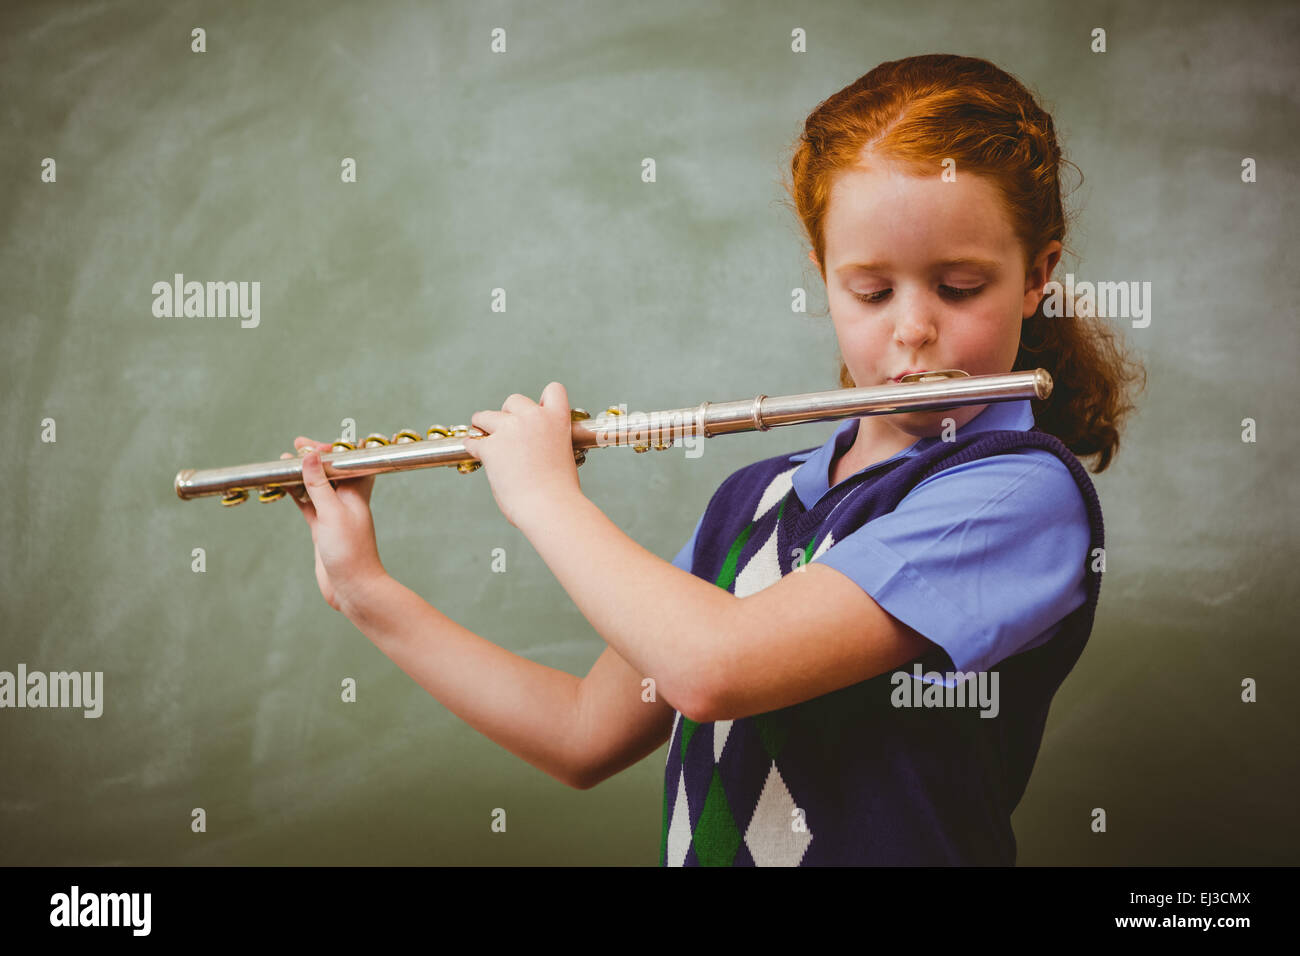 Cute little girl playing flute in classroom Banque D'Images